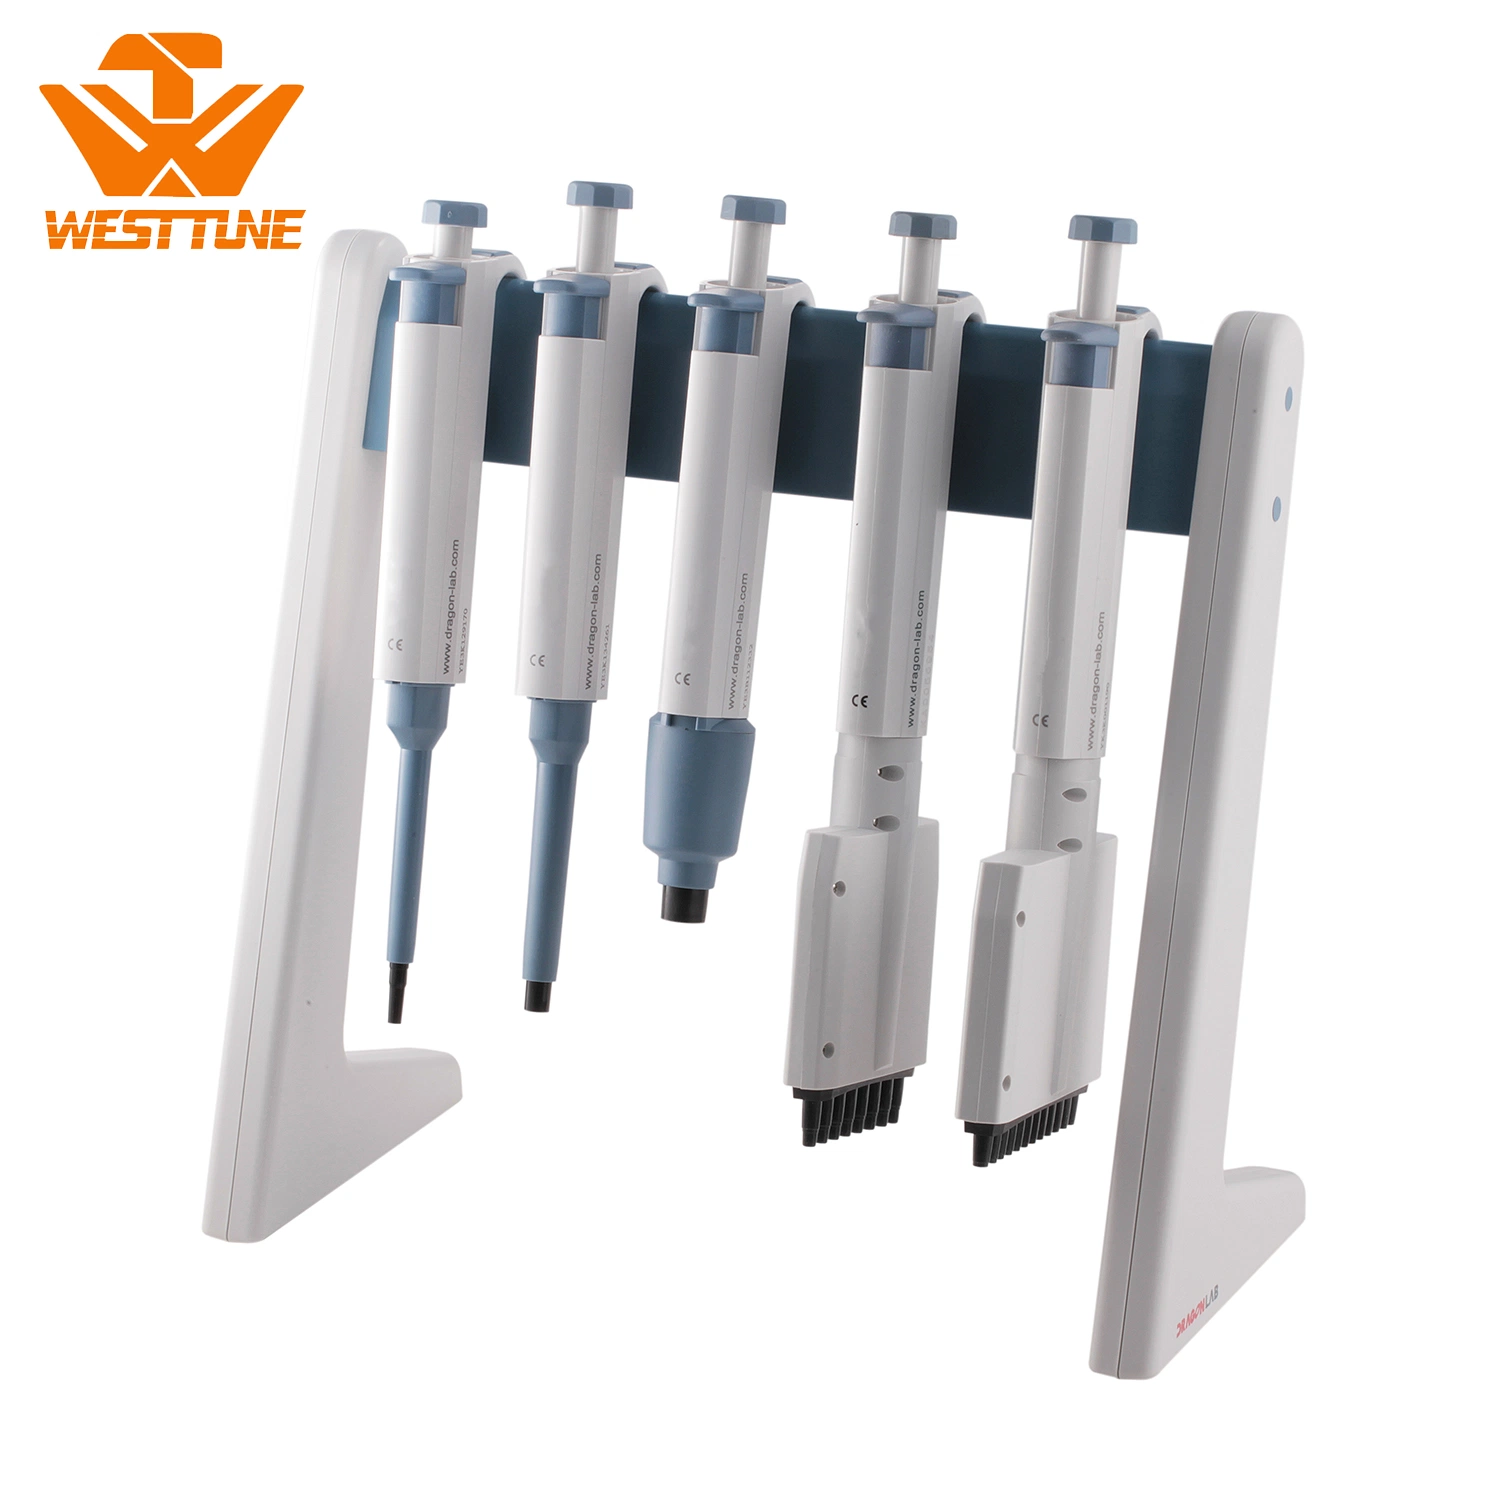 Toppette Lab Single Channel Adjustable Volume Mechanical Pipette